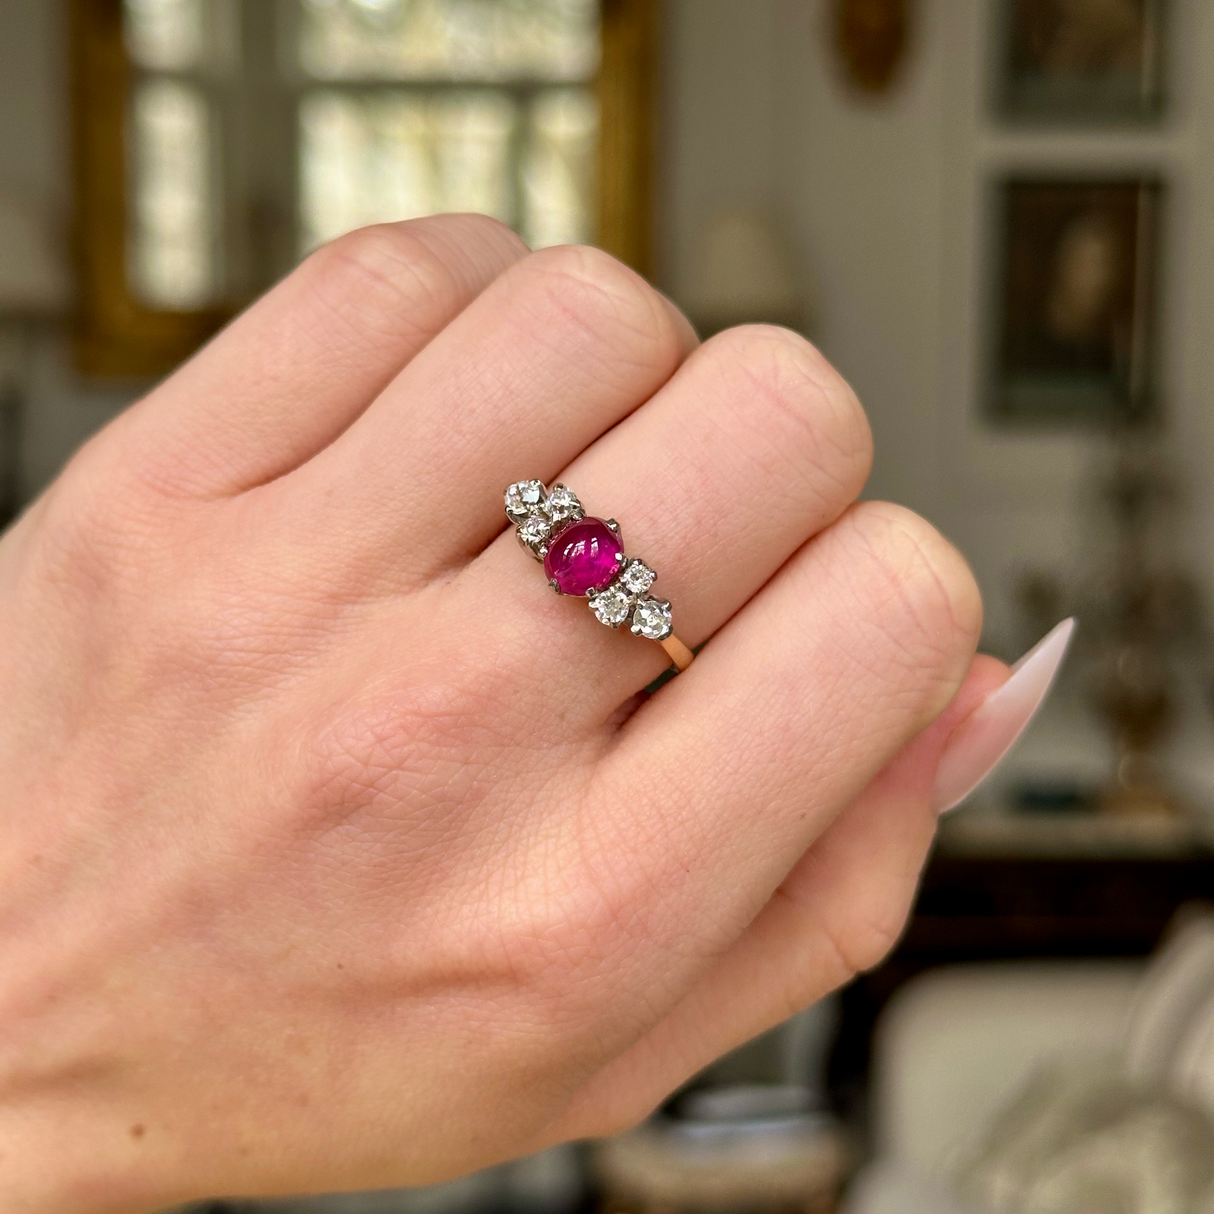 Antique, Edwardian Cabochon Ruby and Diamond Ring, worn on closed hand.